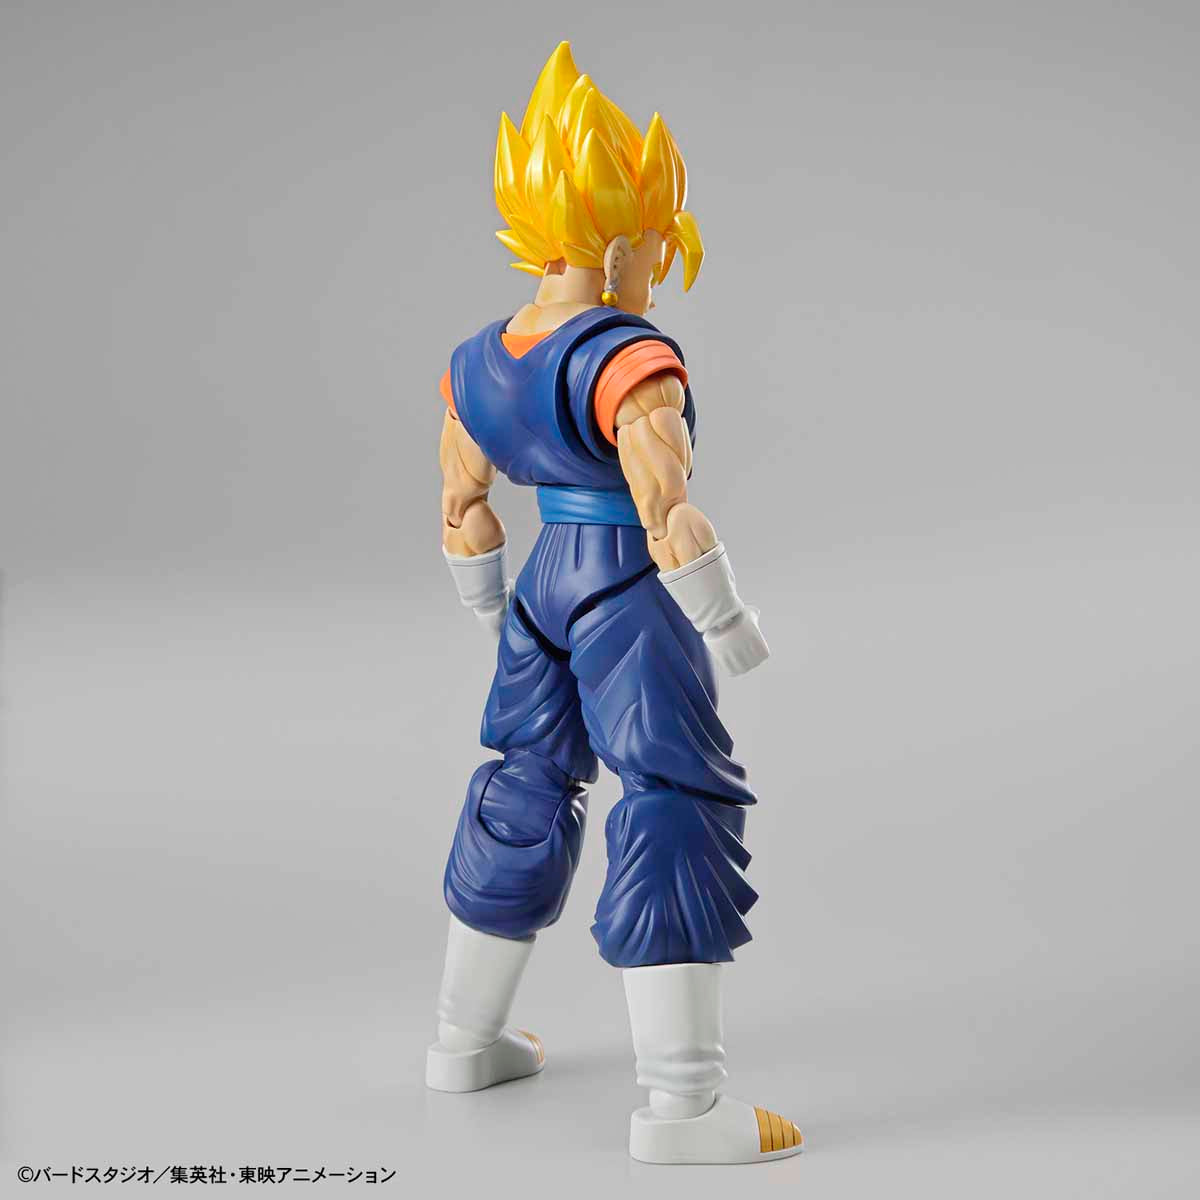 Dragon Ball - Super Saiyan Vegito - Figure-rise Standard Model Kit, Includes 2 facial expression parts (normal, shouting), 7 wrist parts, special attack effect parts, Brand: Bandai, Store Name: Nippon Figures